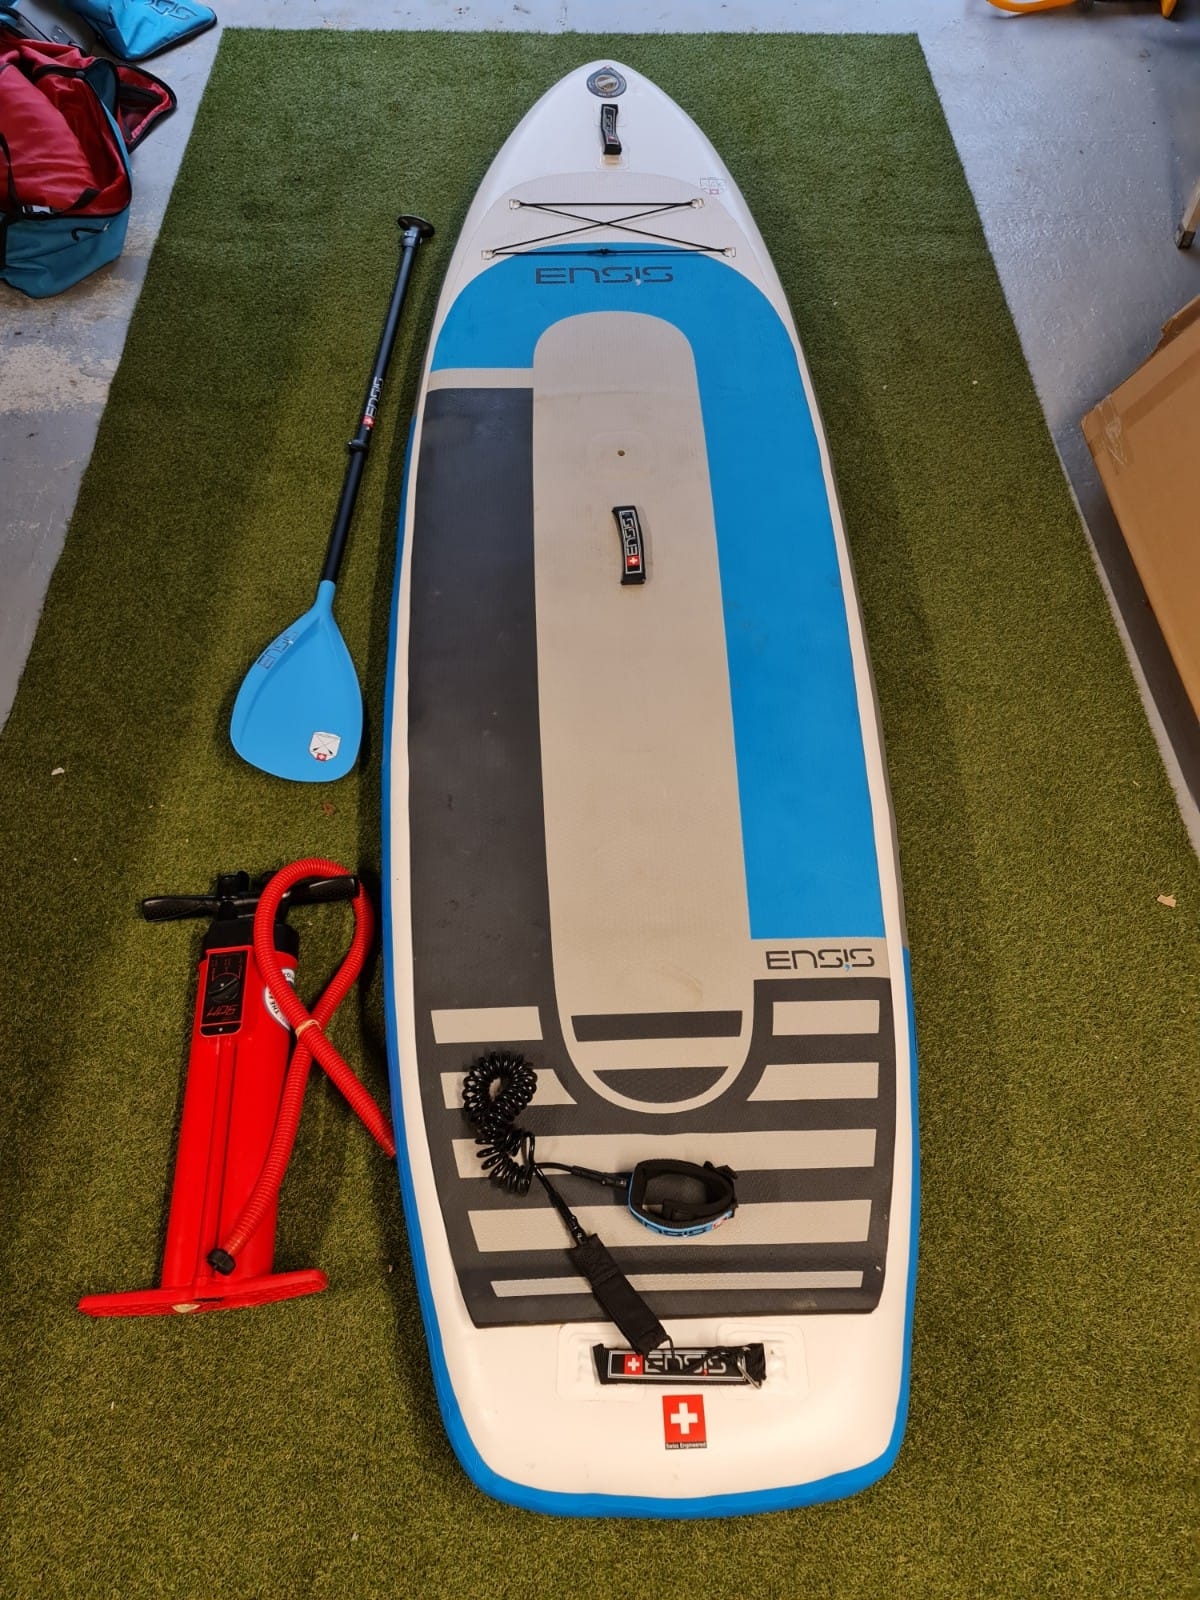 Used Ensis 3 in 1 iSUP 10’6 – The Foiling Collective